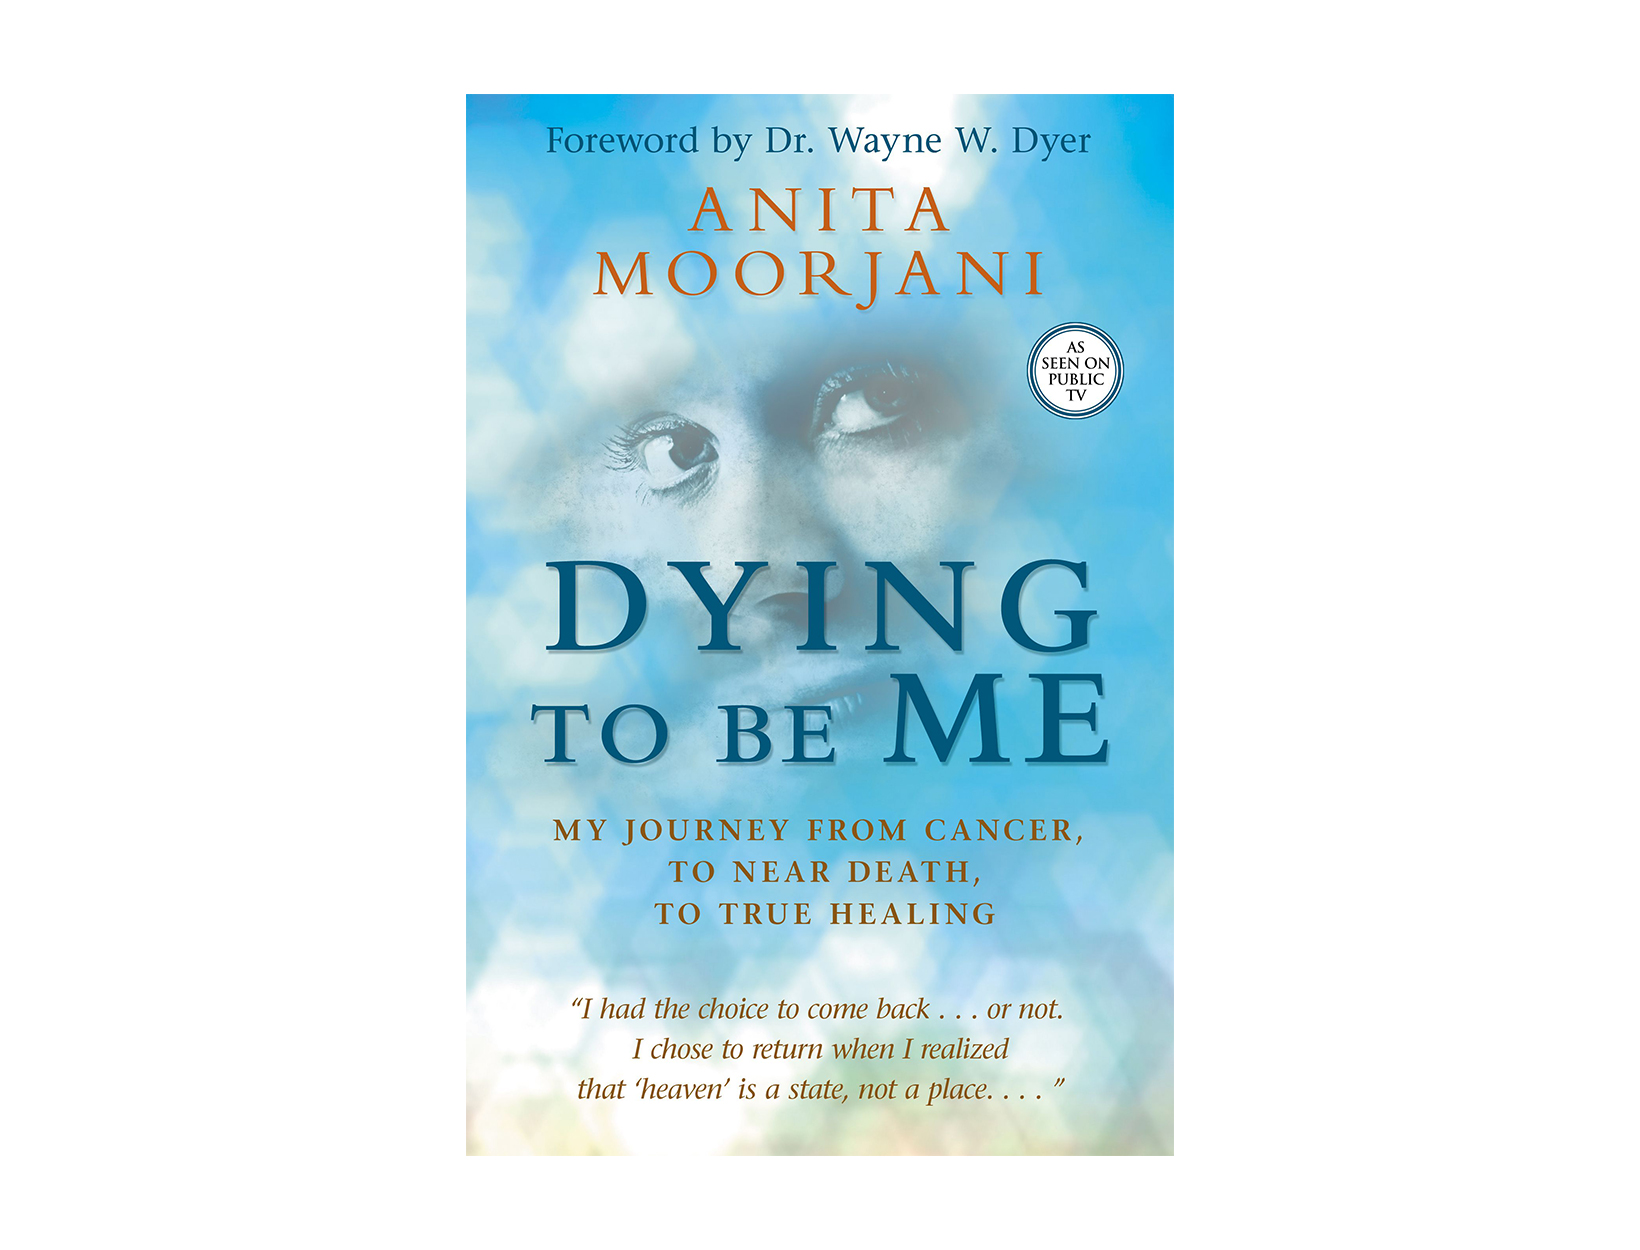 Dying To Be Me: My Journey from Cancer, to Near Death, to True Healing by Anita Moorjani